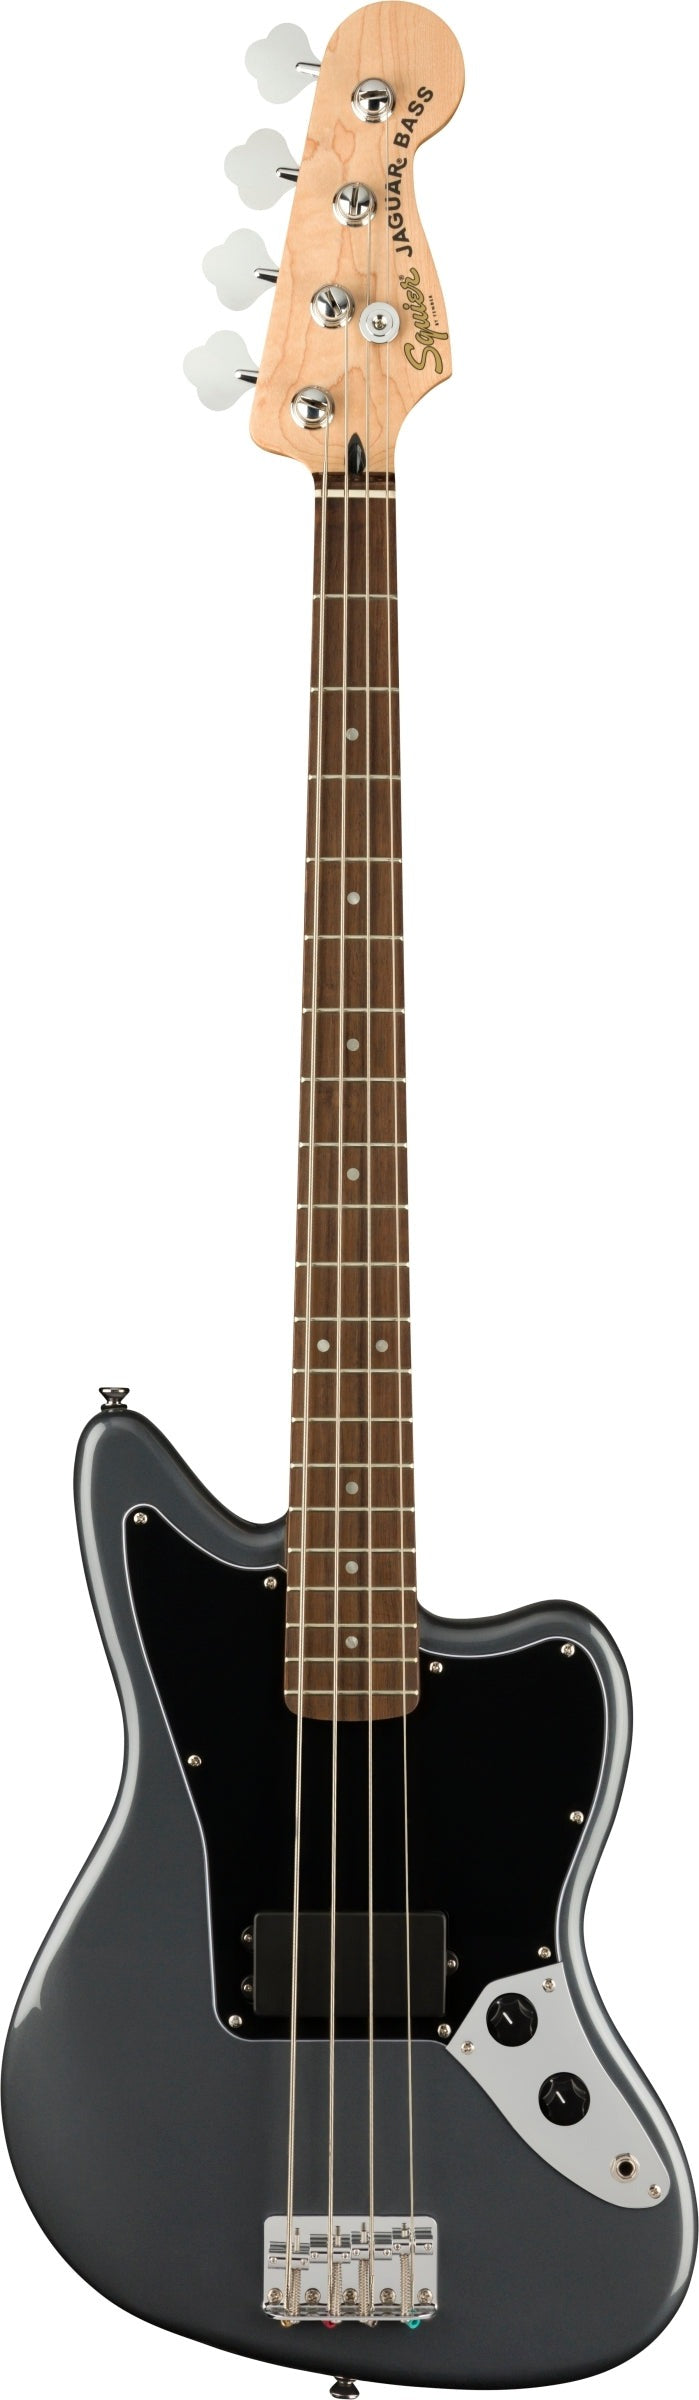 Squier Affinity Series Jaguar 4-String Electric Bass  - Charcoal Frost Metallic